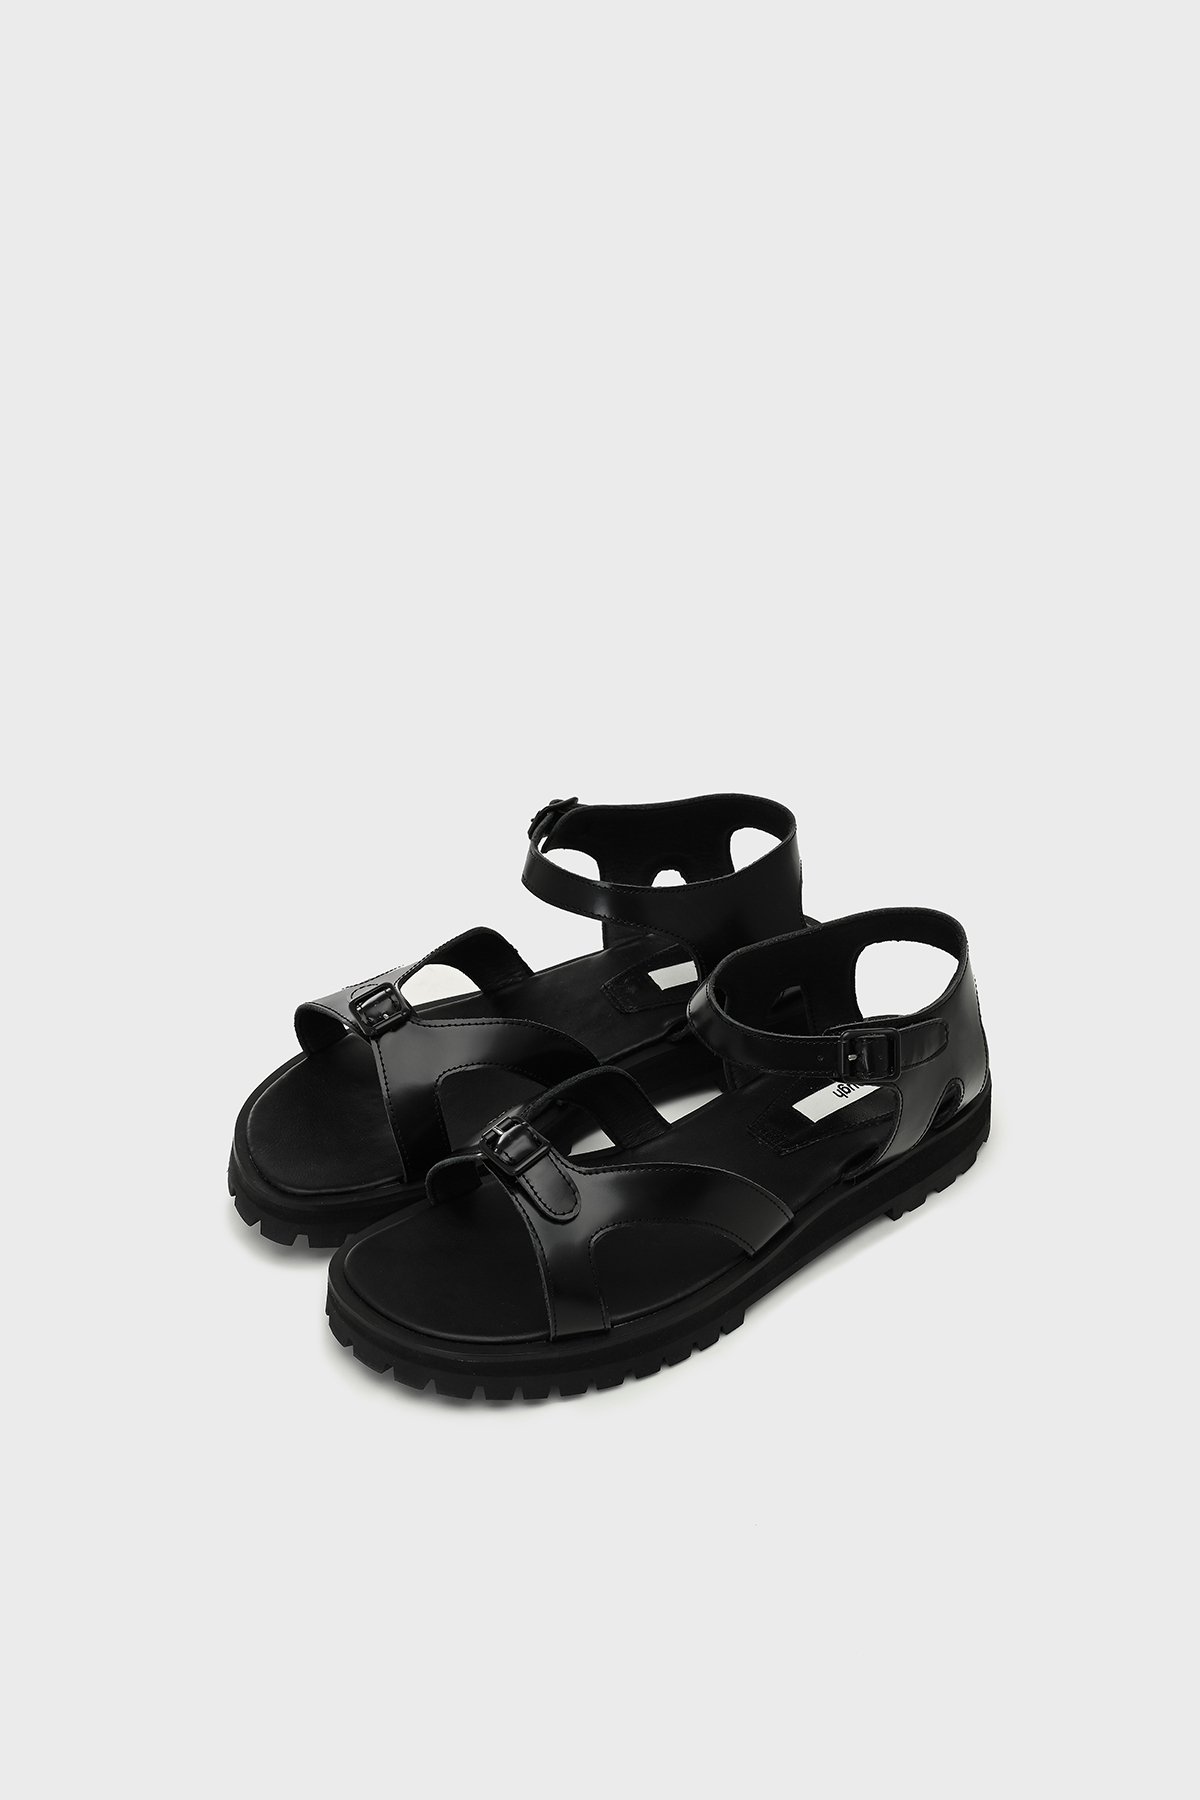 Buckle Strap Sandals_Box Leather